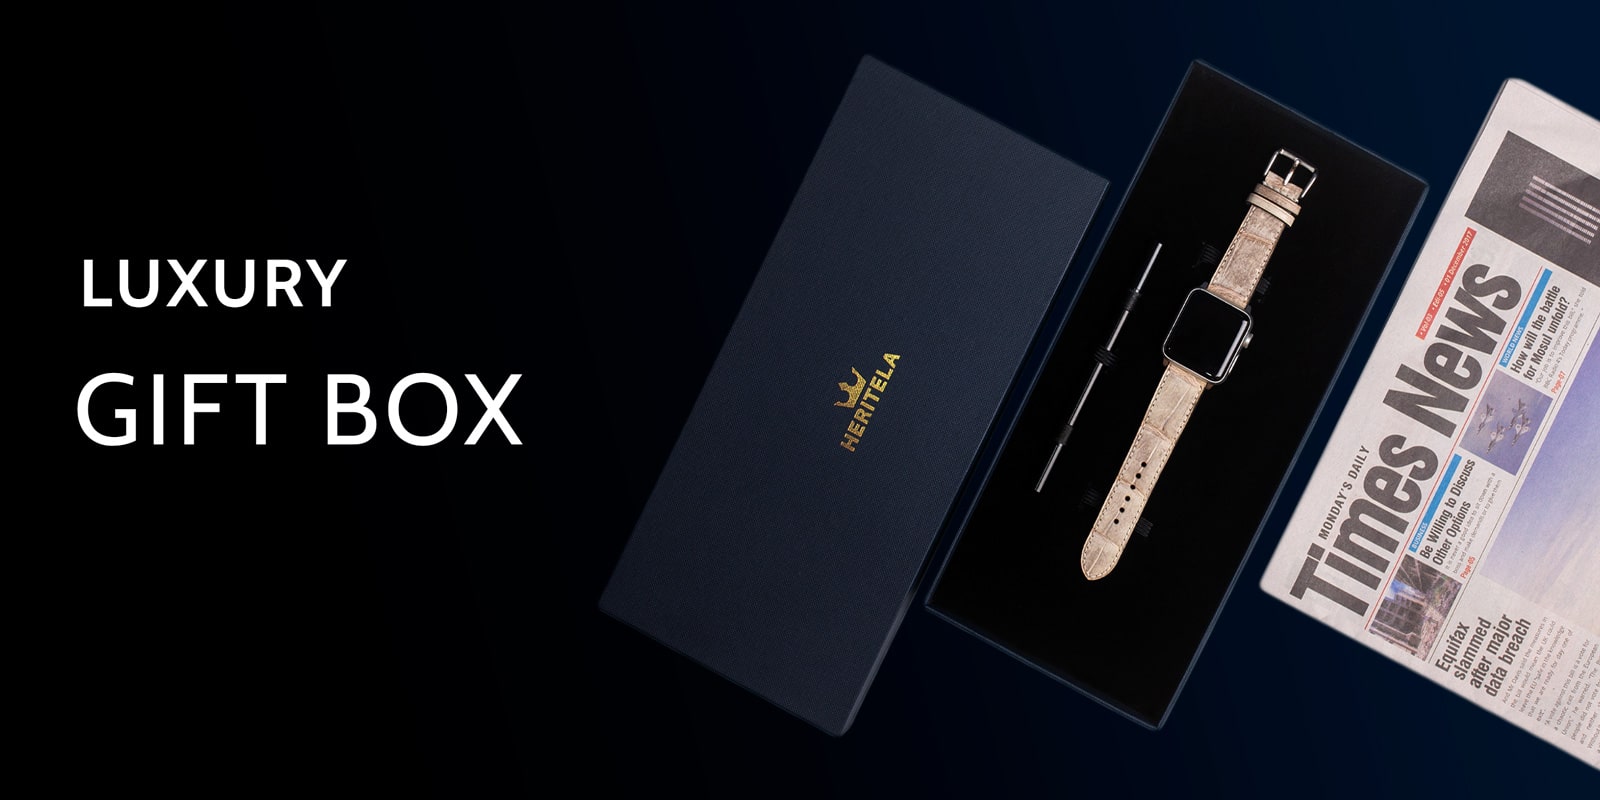 Luxury giftbox for watch straps by Heritela